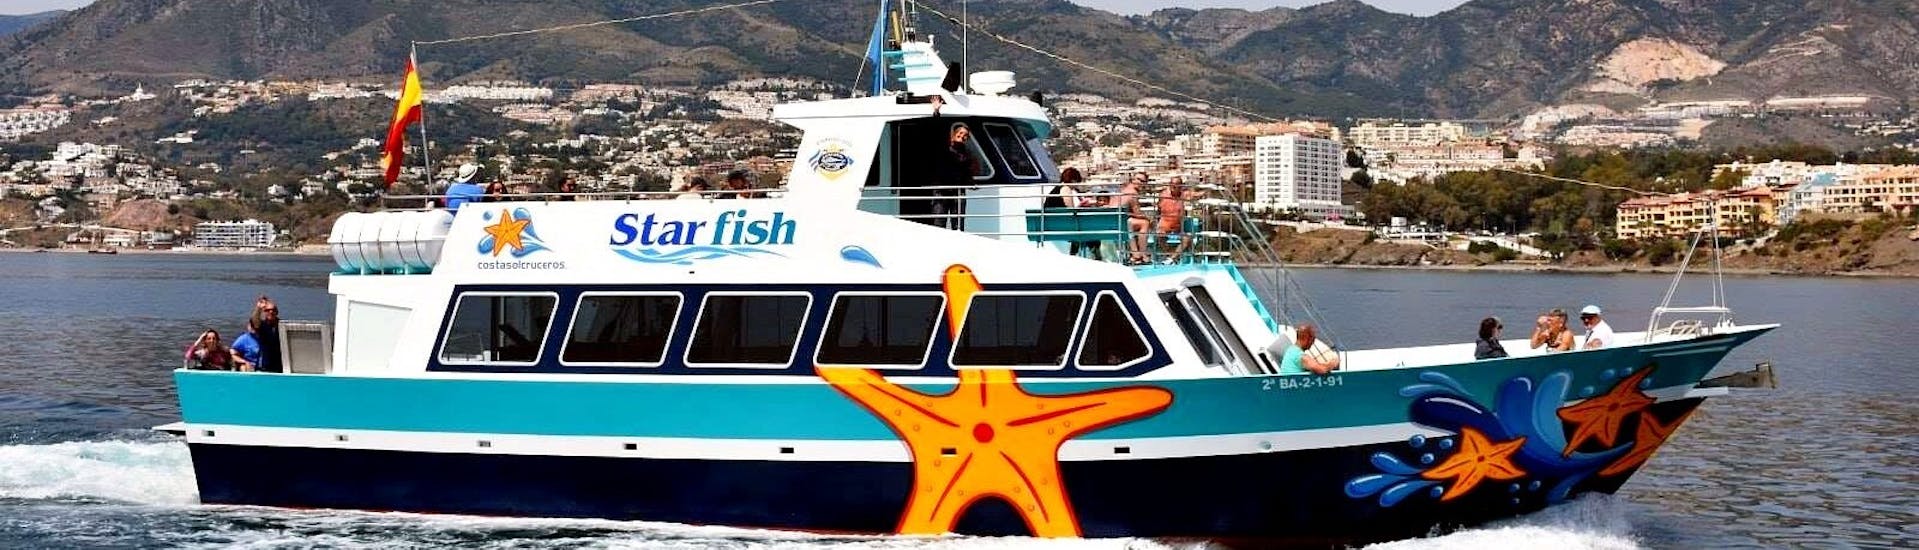 The Starfish Two ferry cruising on the beautiful blue waters of the Mediterranean  during a boat transfer between Benalmádena and Fuengirola with Costasol Cruceros.